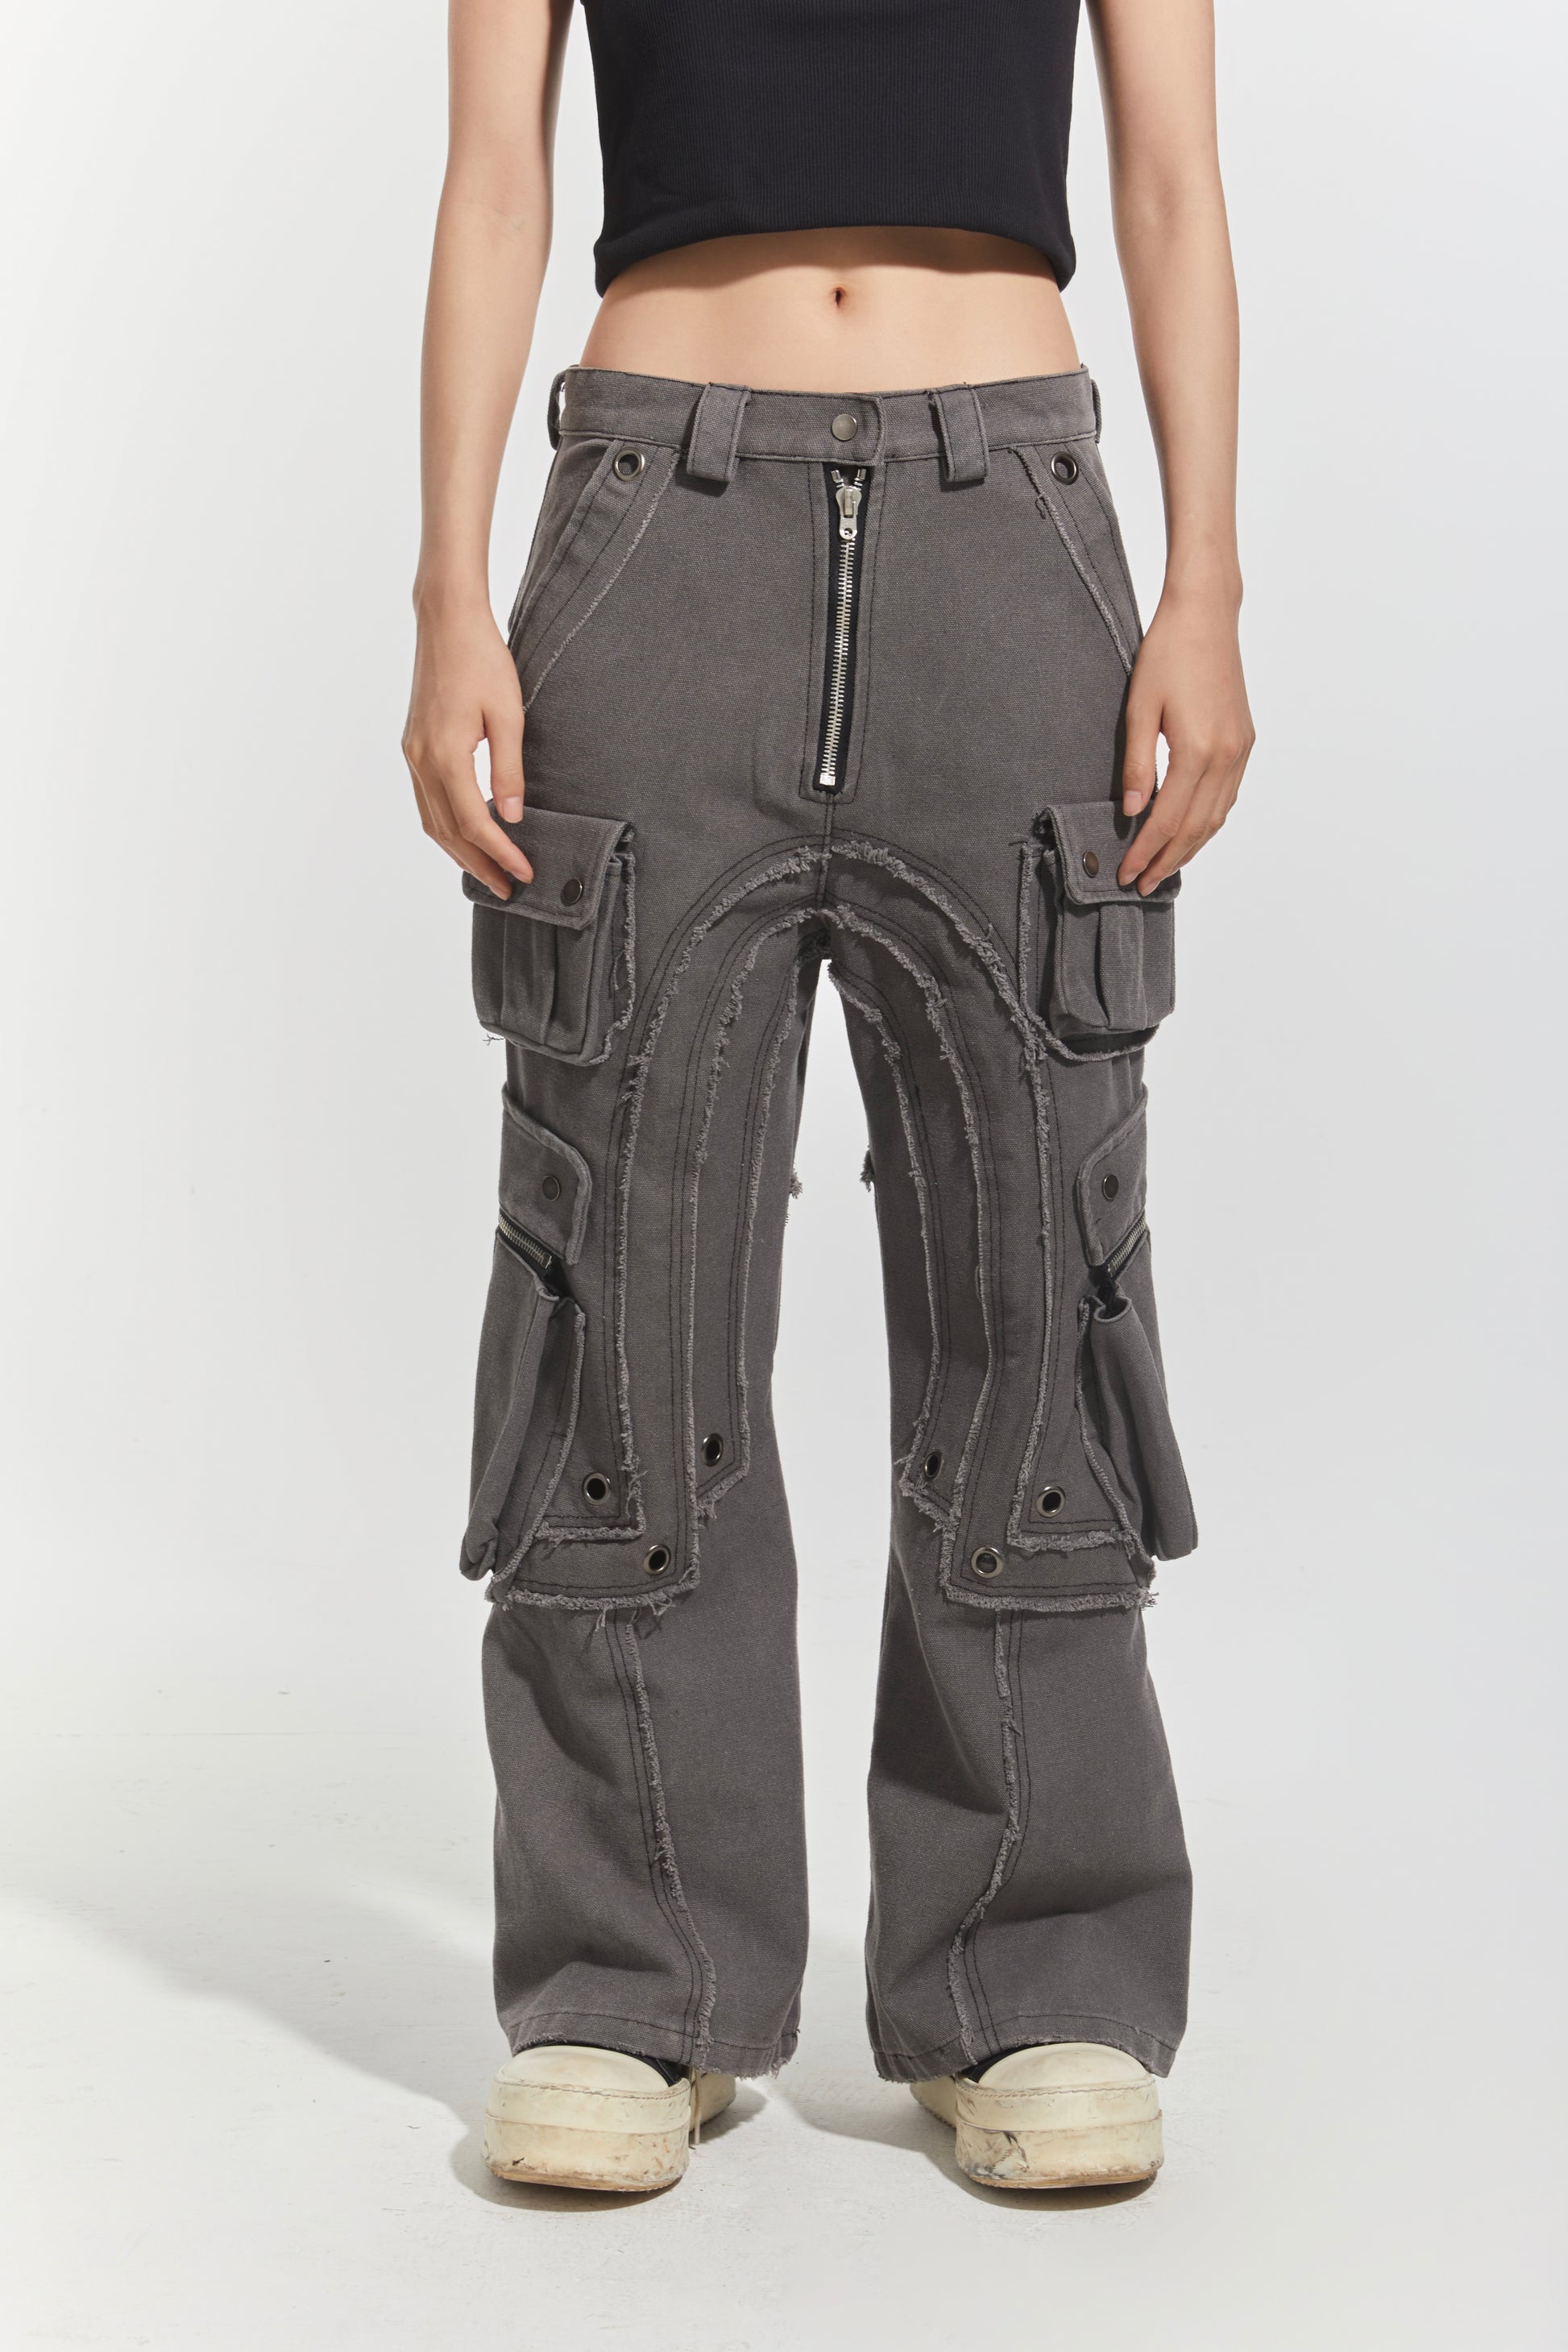 CHP-1 006 WASHED GREY MULTI-POCKET FLARED CARGO PANTS – ERIC CRÉER